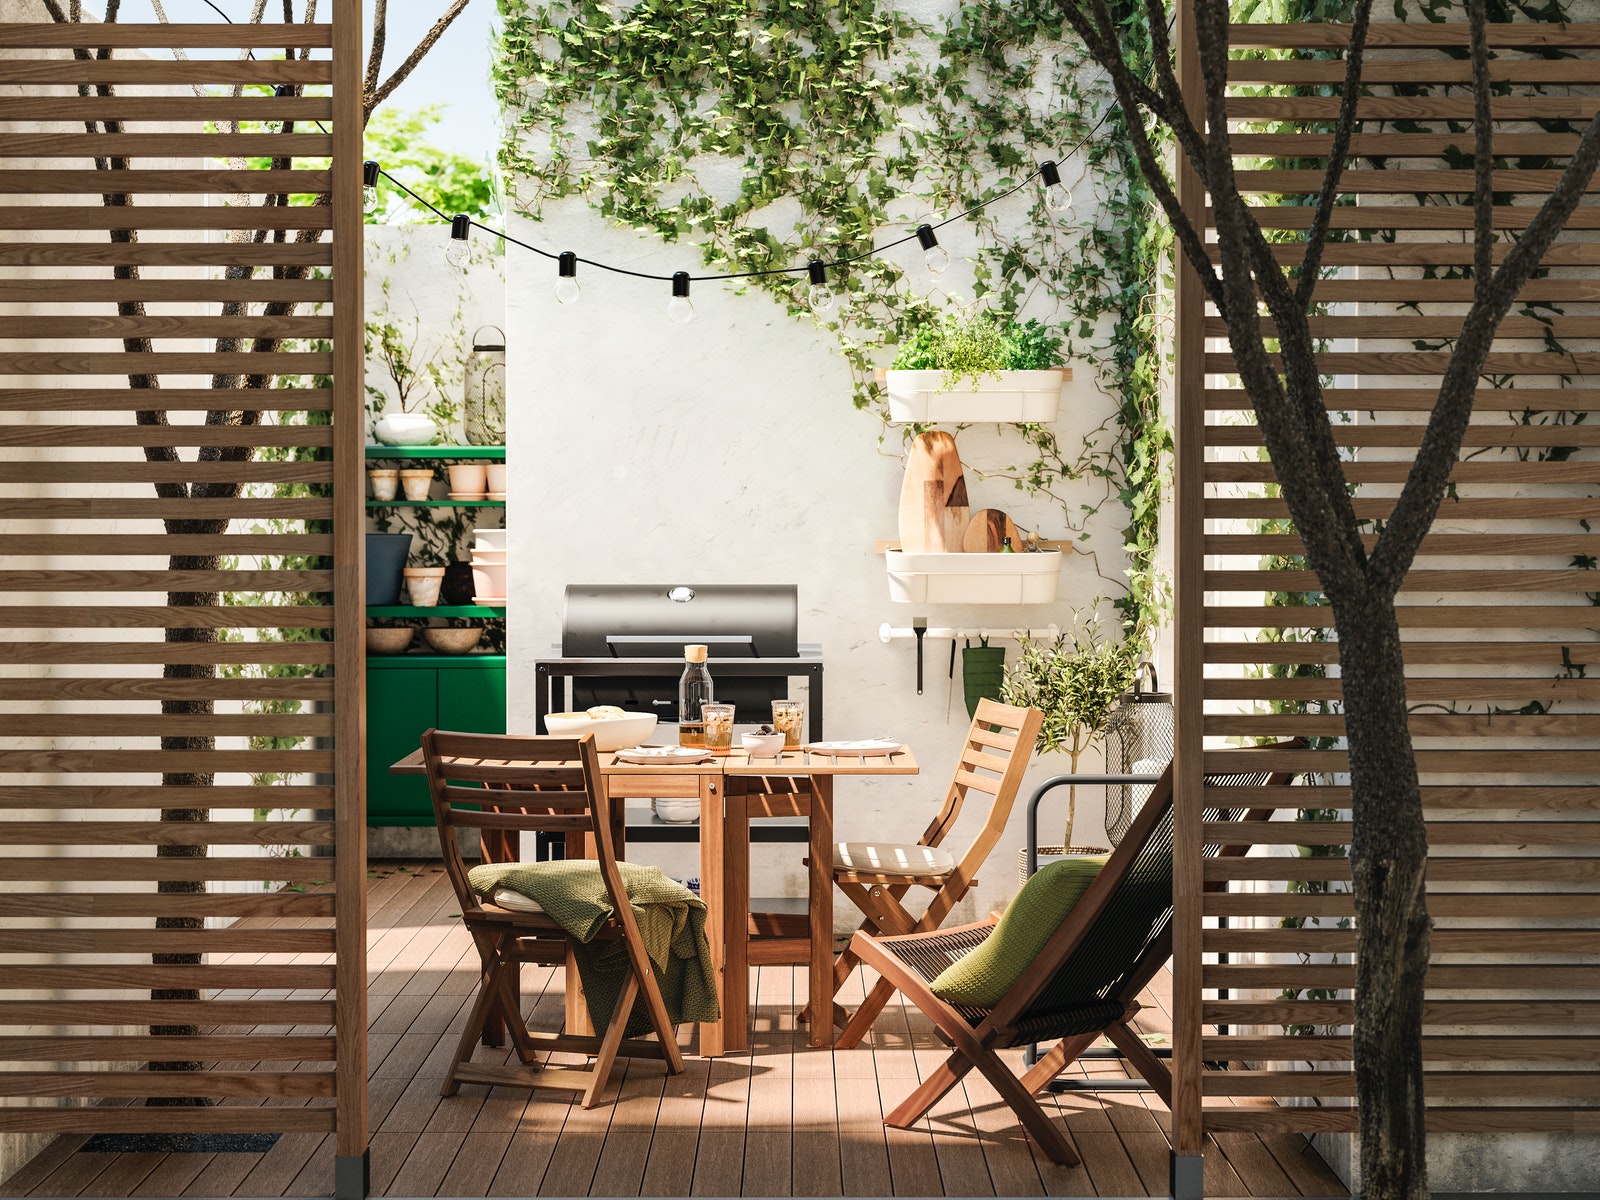 IKEA - A lush and calm outdoor space